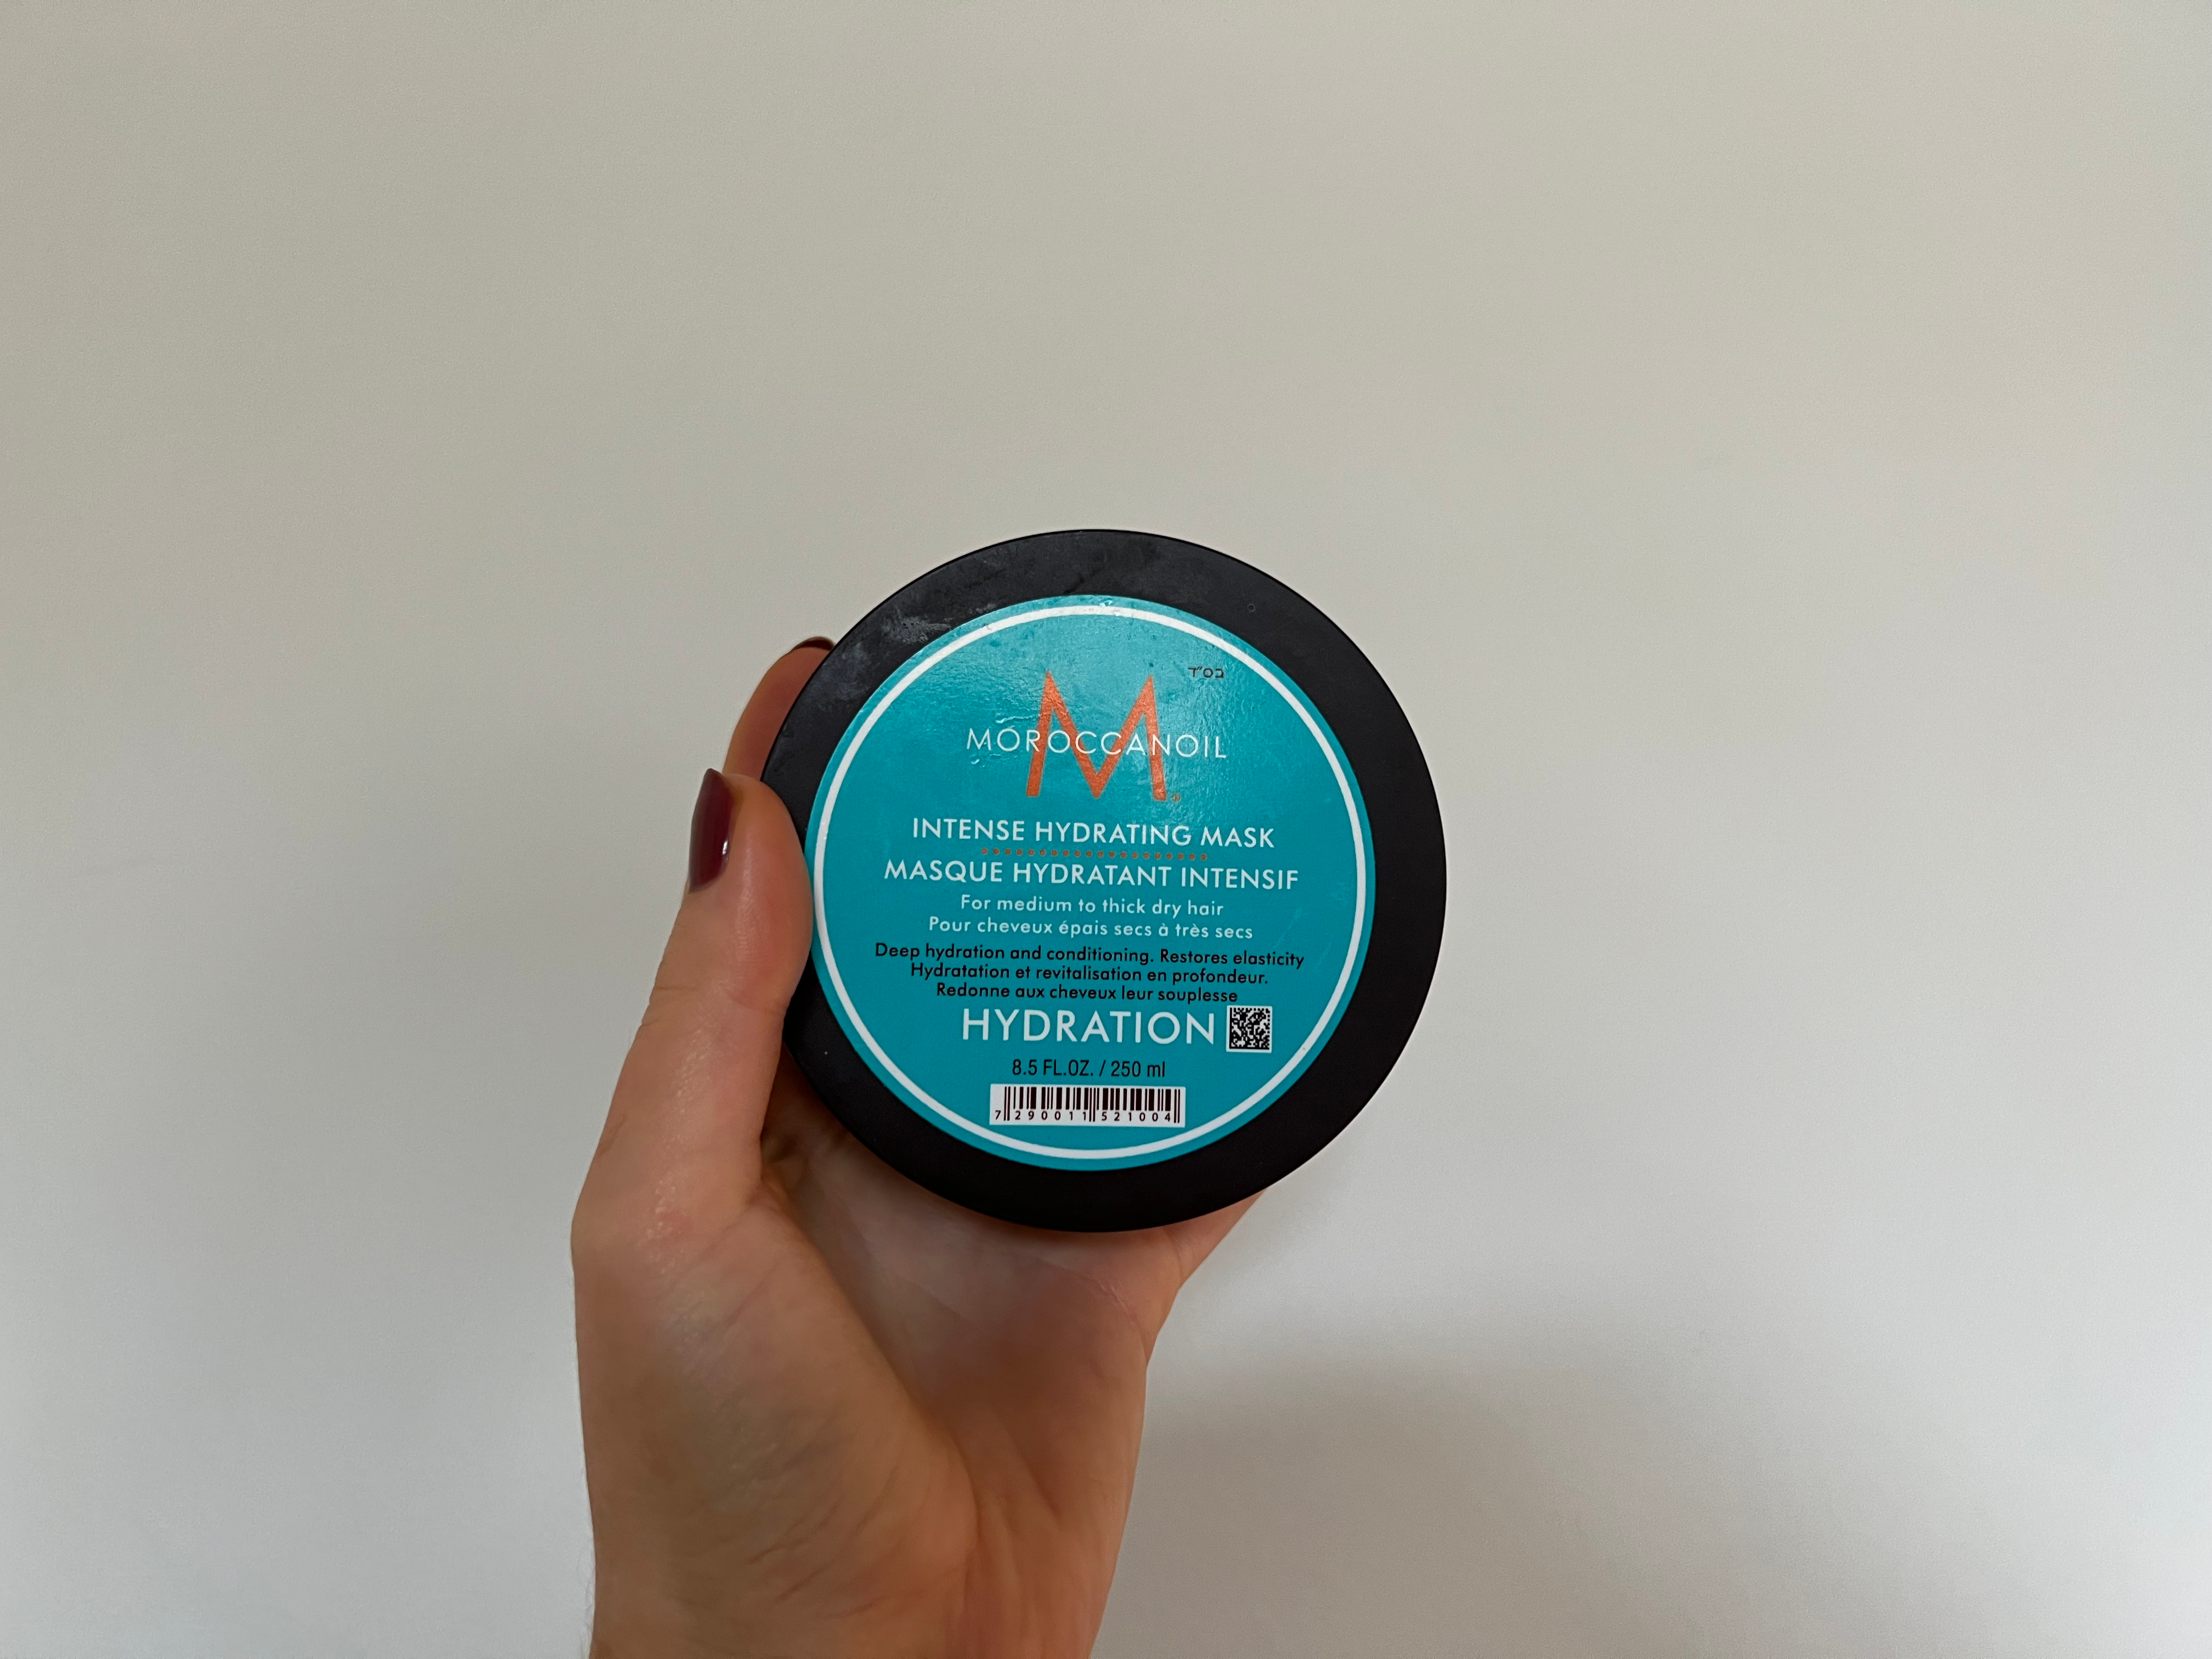 Moroccanoil intense hydrating mask review